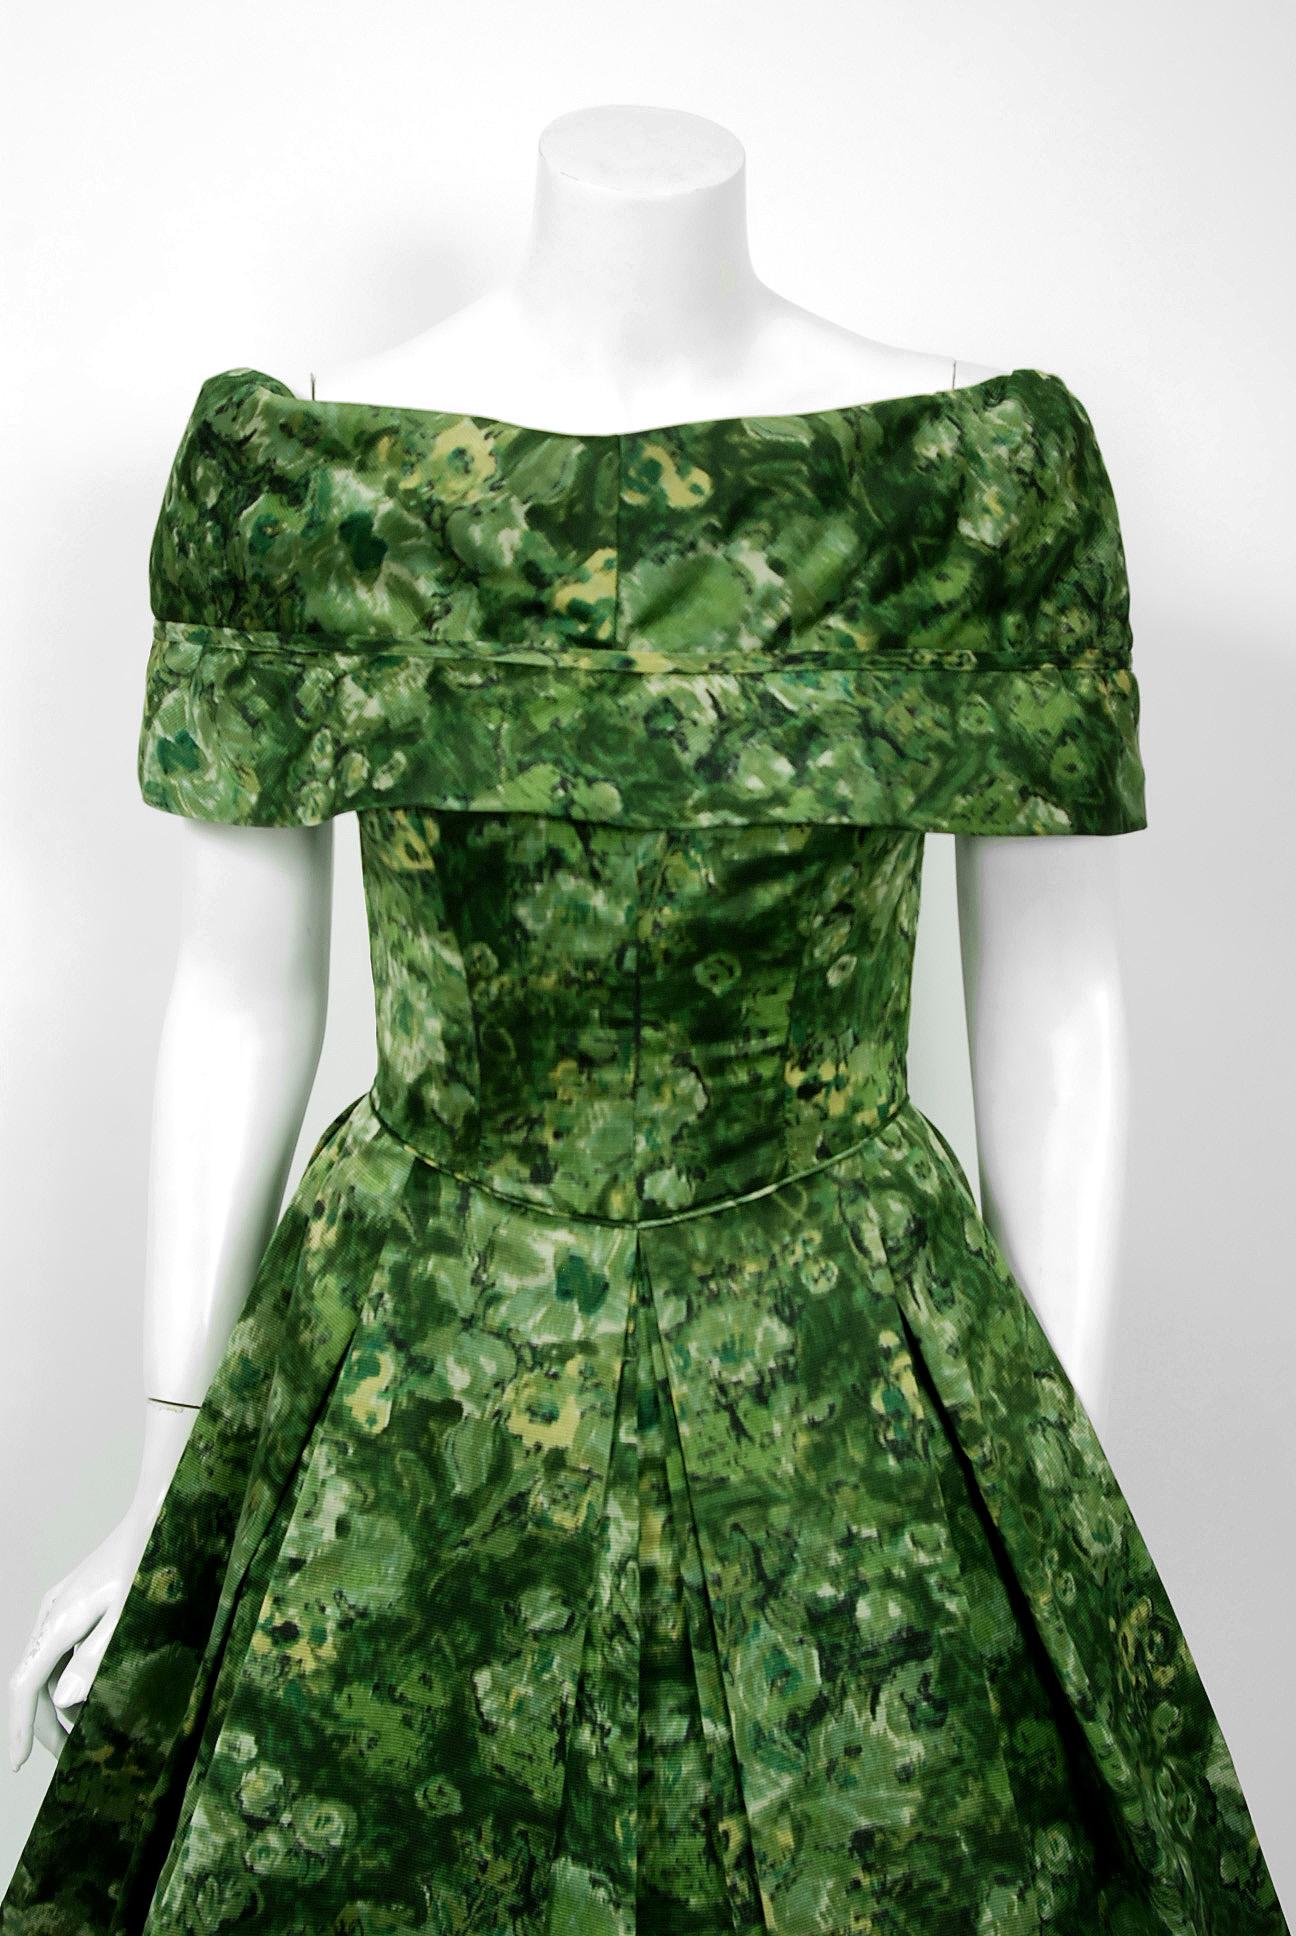 An amazing and highly stylized 1950's floral silk-faille dress by the famous American designer Peggy Hunt. Starting in the 1930's through the early 1960's, she was immensely successful with her specialized cocktail and evening looks. Her garments